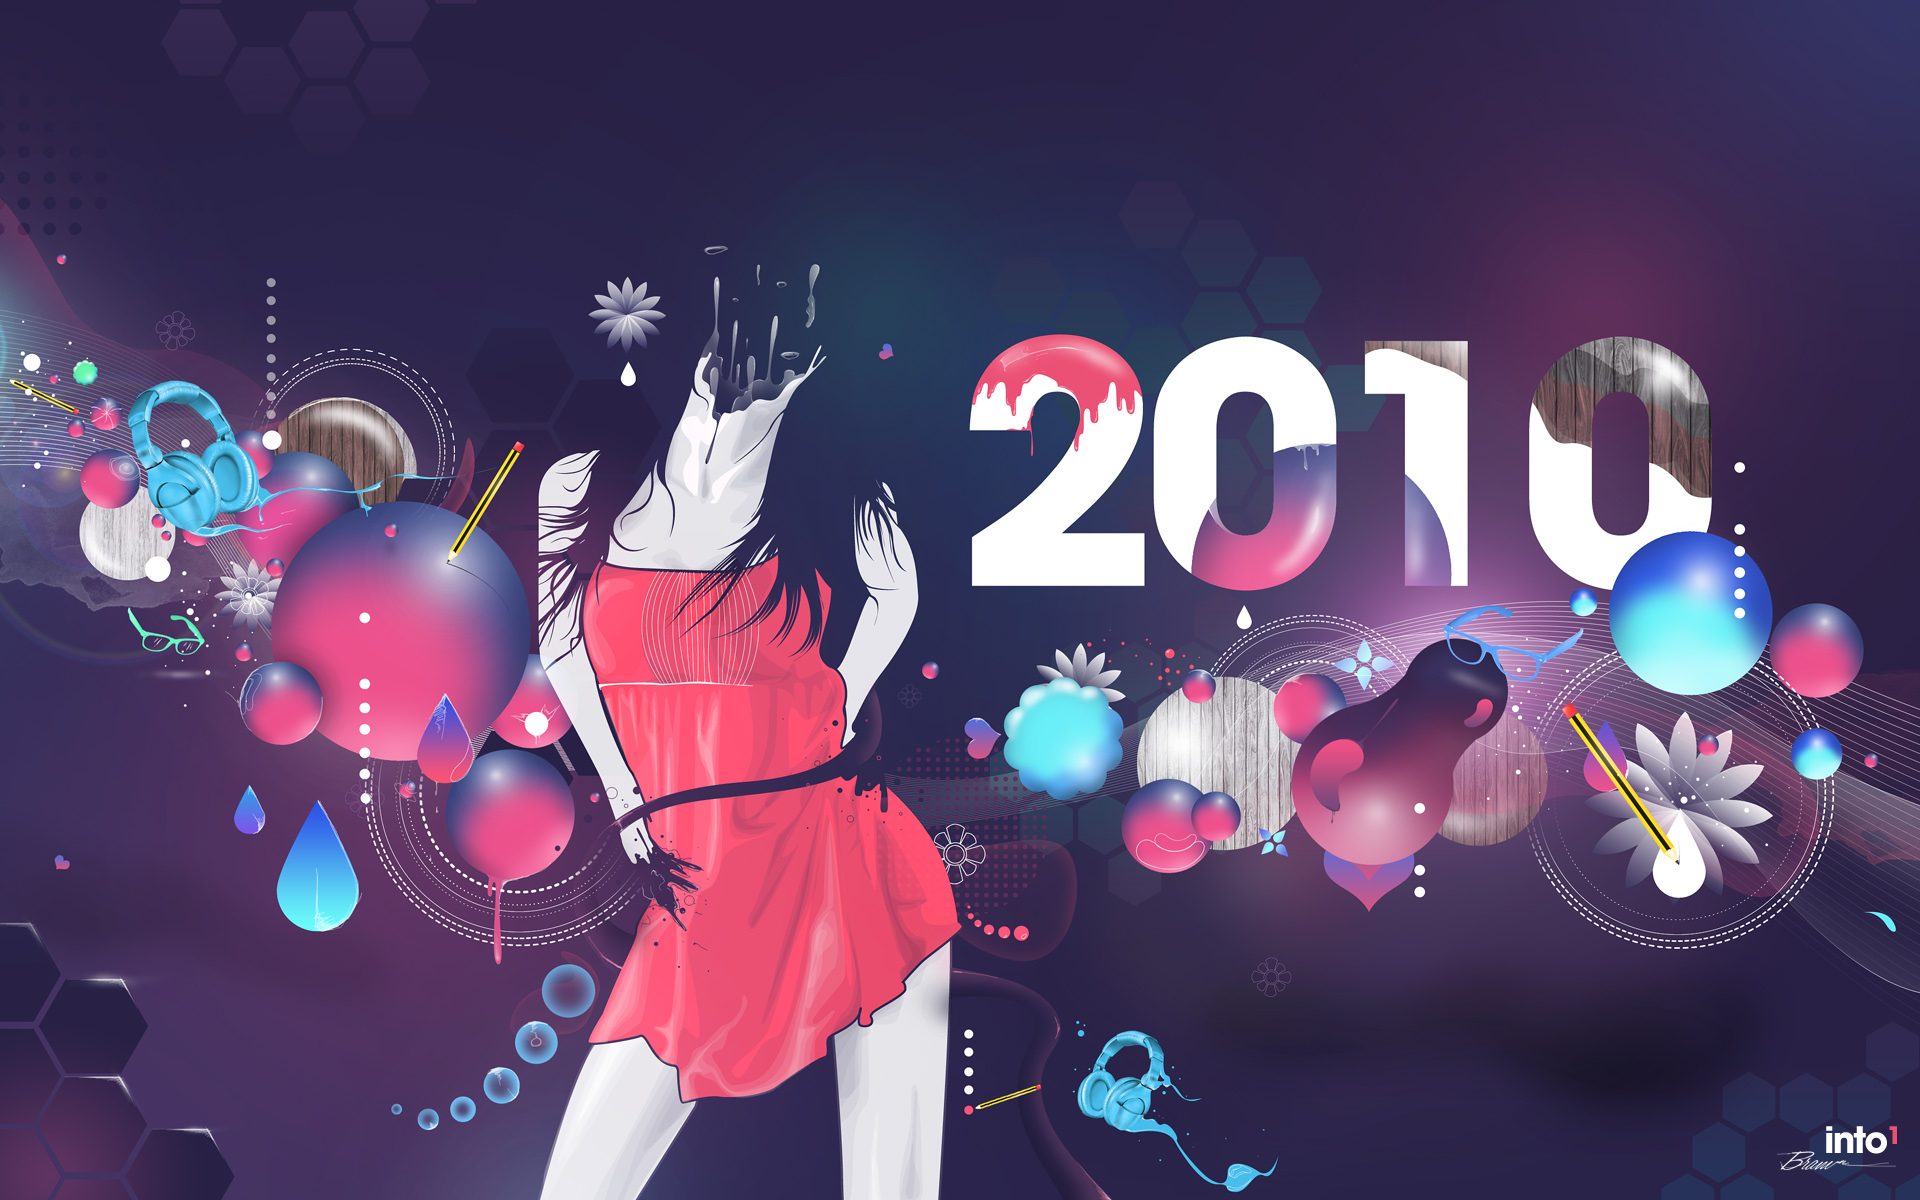 Stepping into Year 2010 with 20 Fabulous + 5 Exclusive Wallpapers